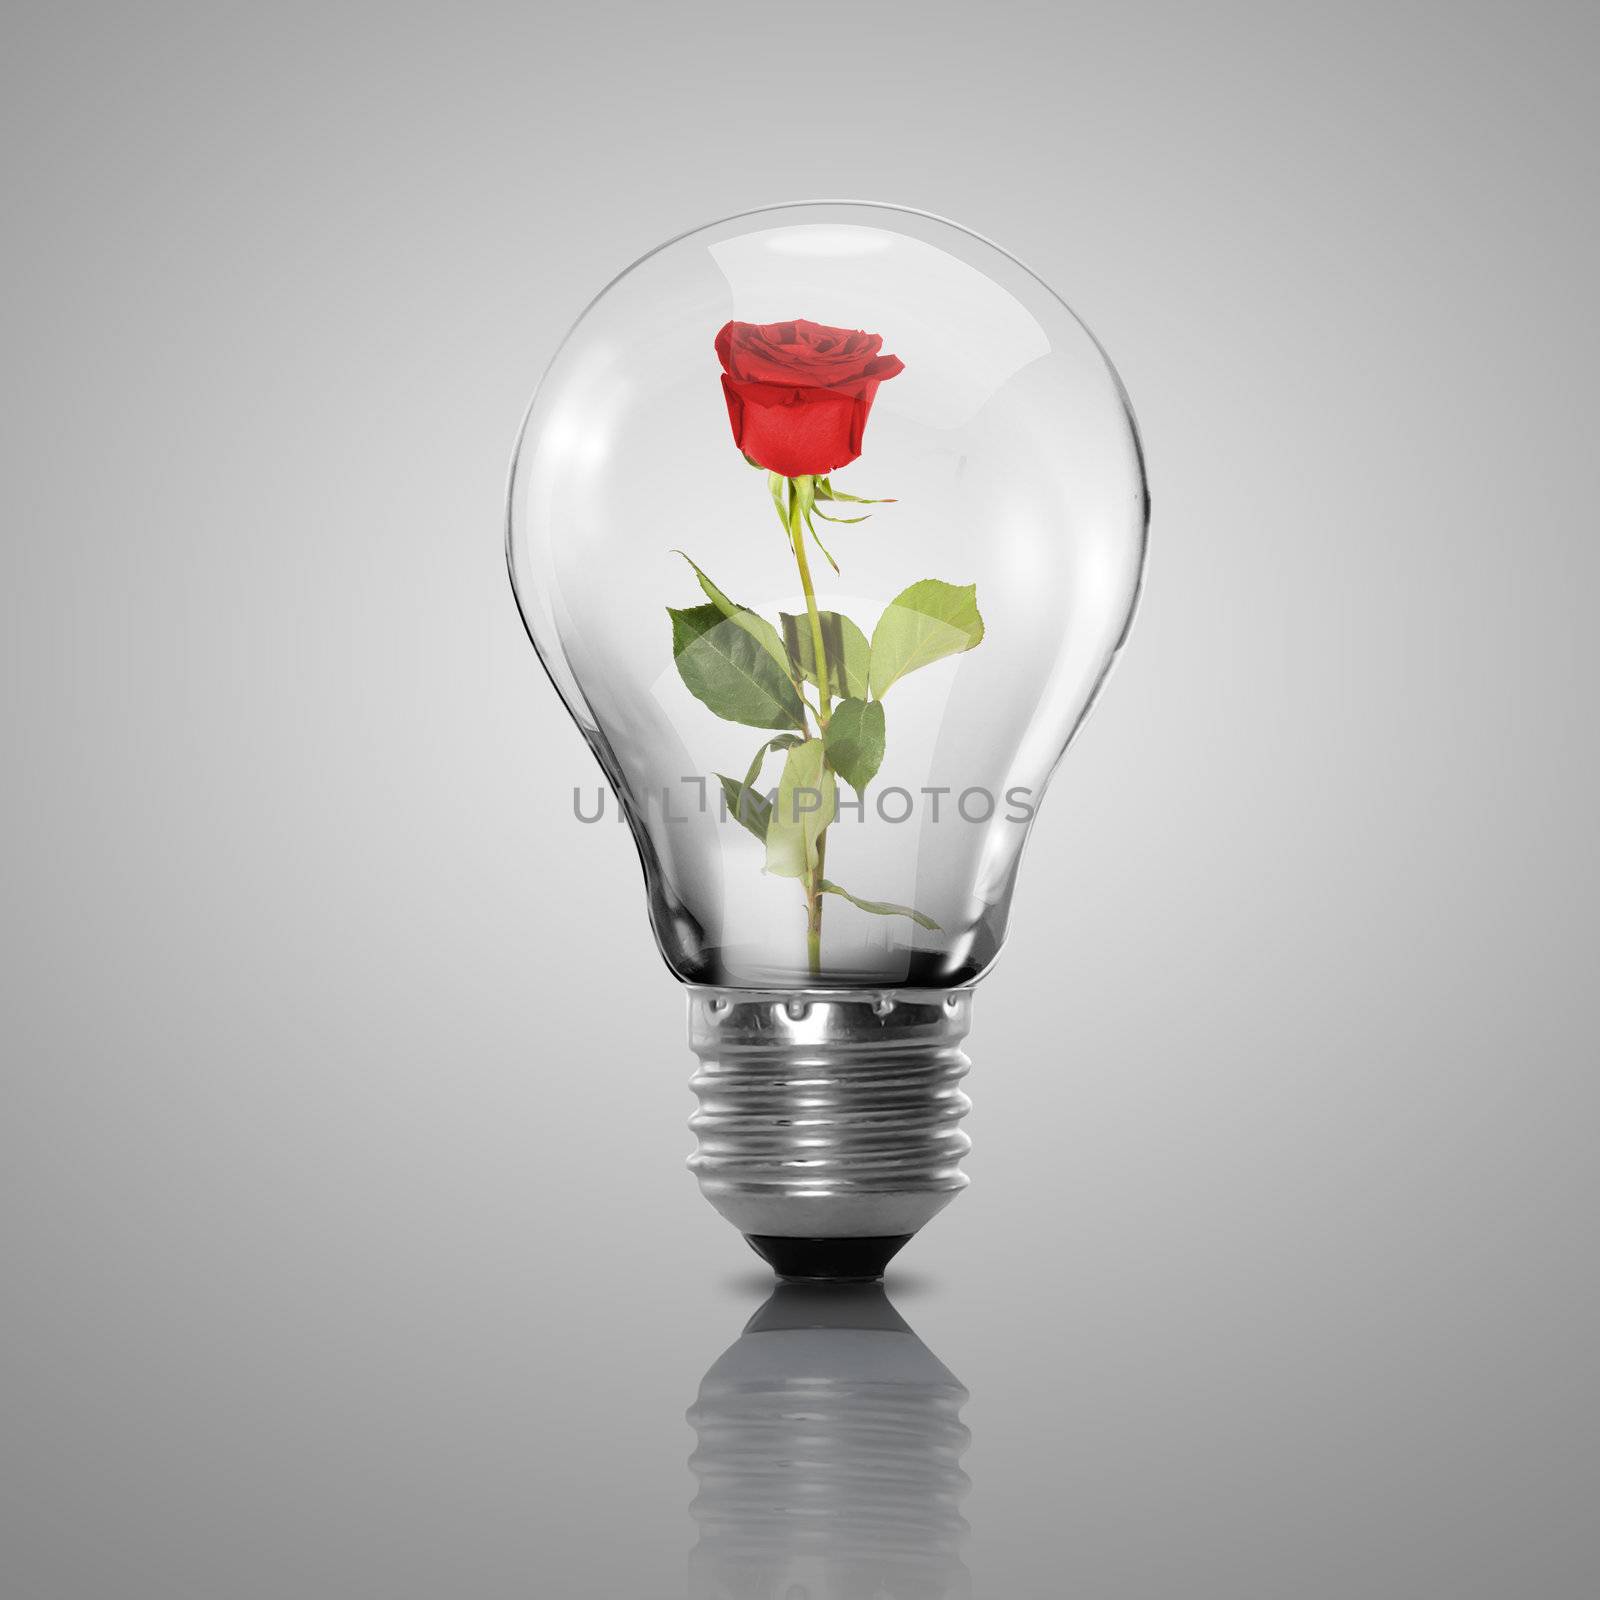 Electric light bulb and flower inside it by sergey_nivens